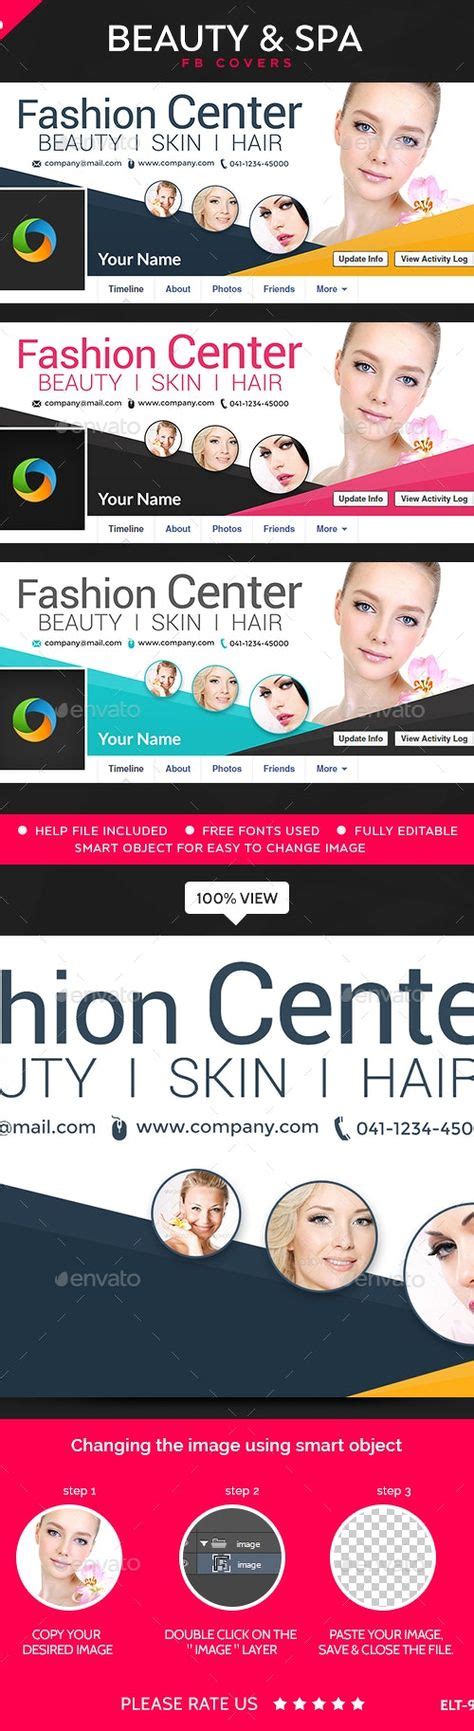 beauty spa facebook cover facebook timeline covers social media